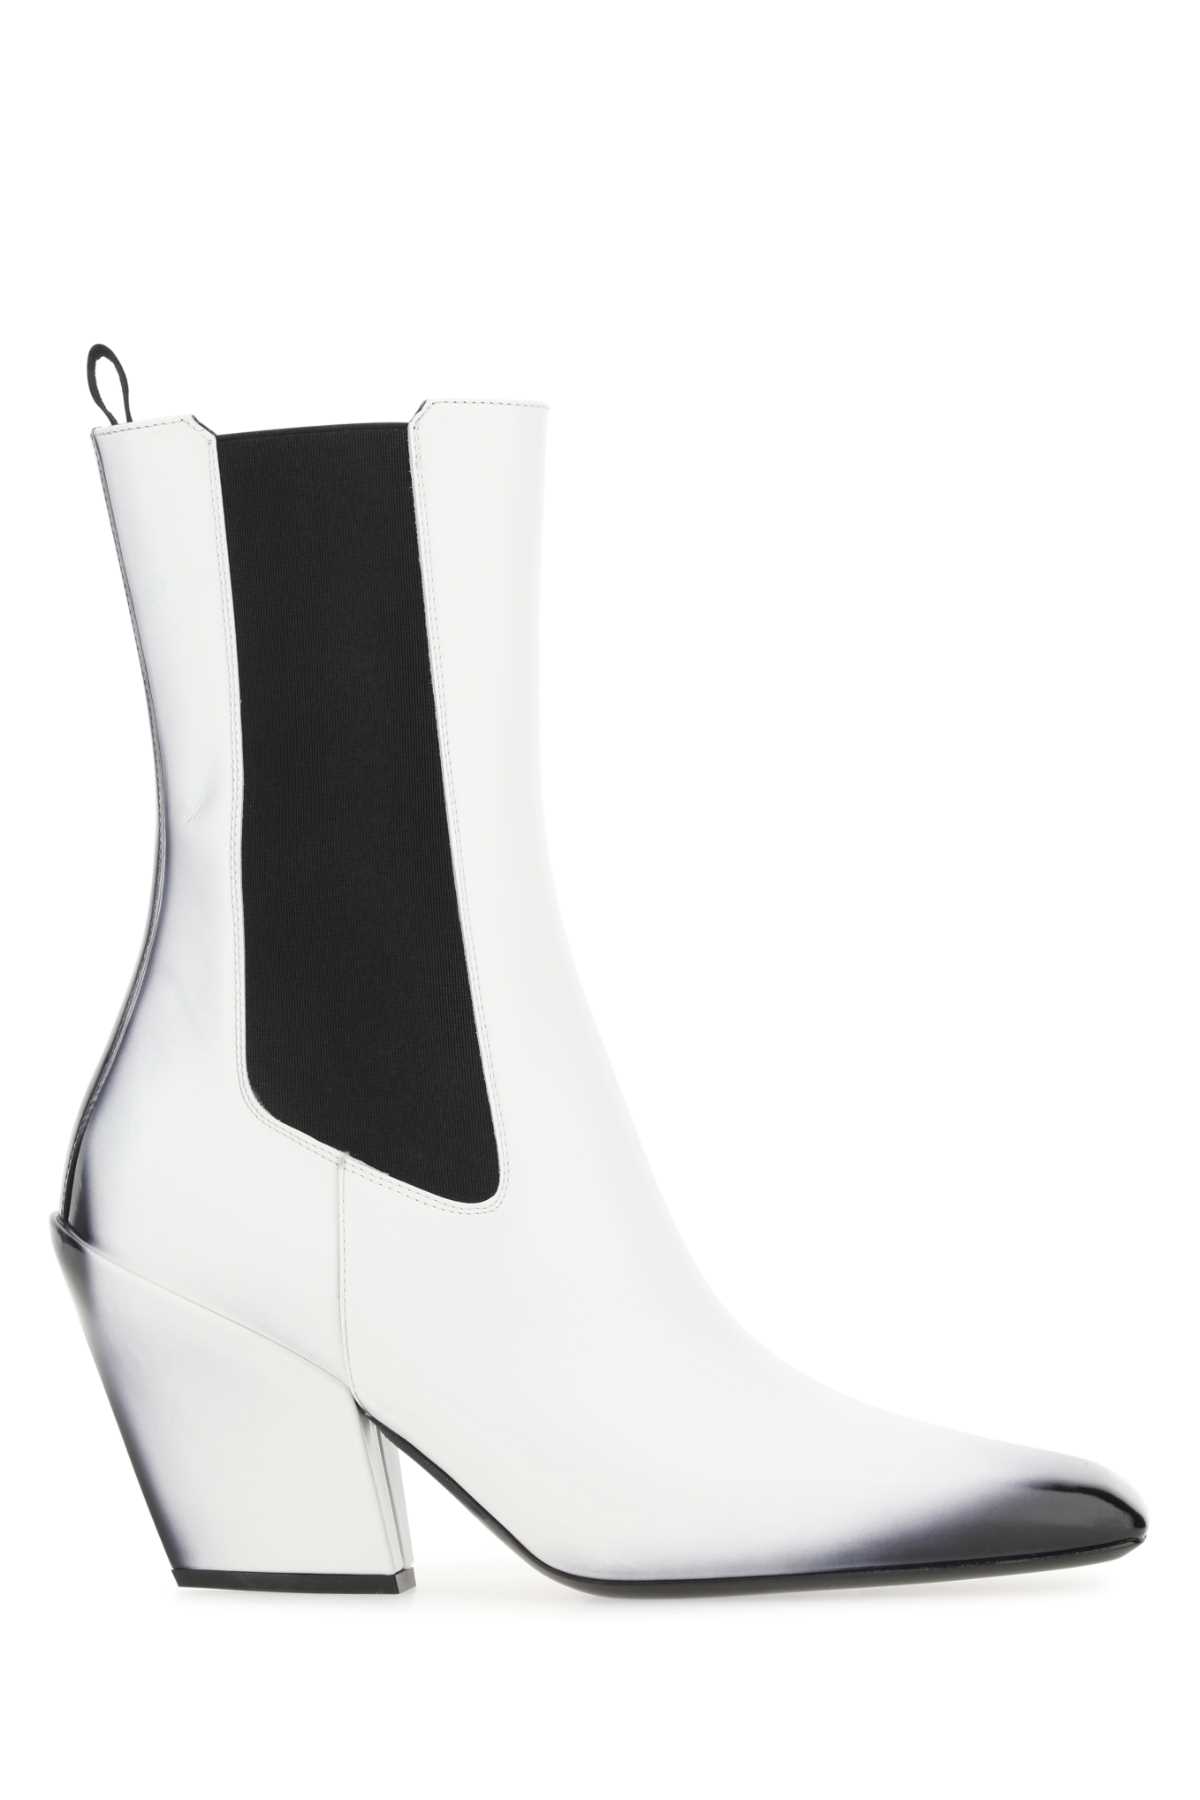 Prada White Leather Ankle Boots